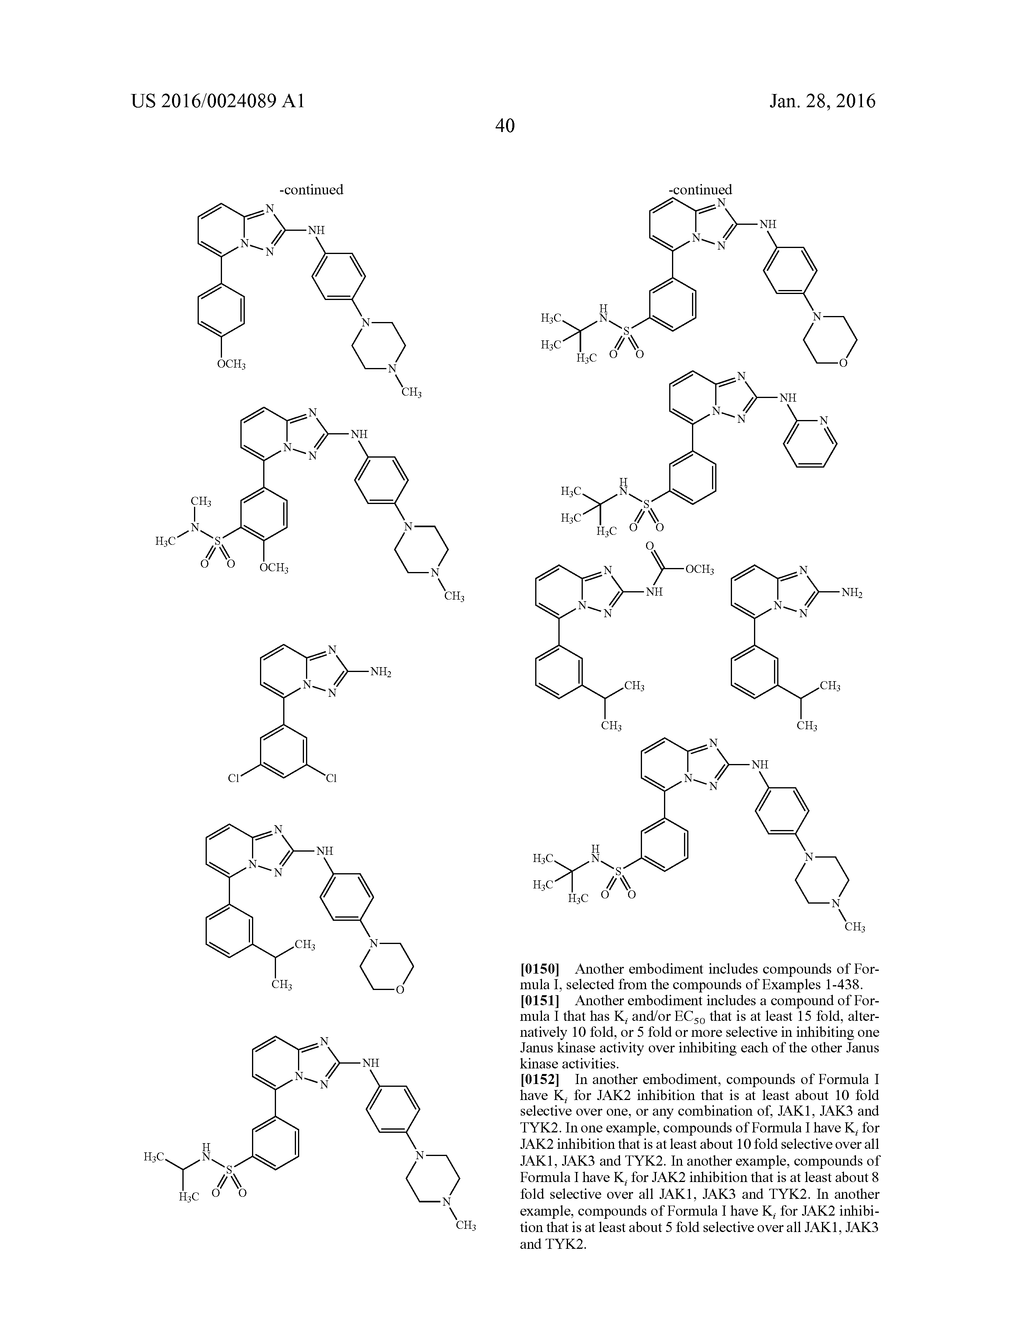 TRIAZOLOPYRIDINE JAK INHIBITOR COMPOUNDS AND METHODS - diagram, schematic, and image 41